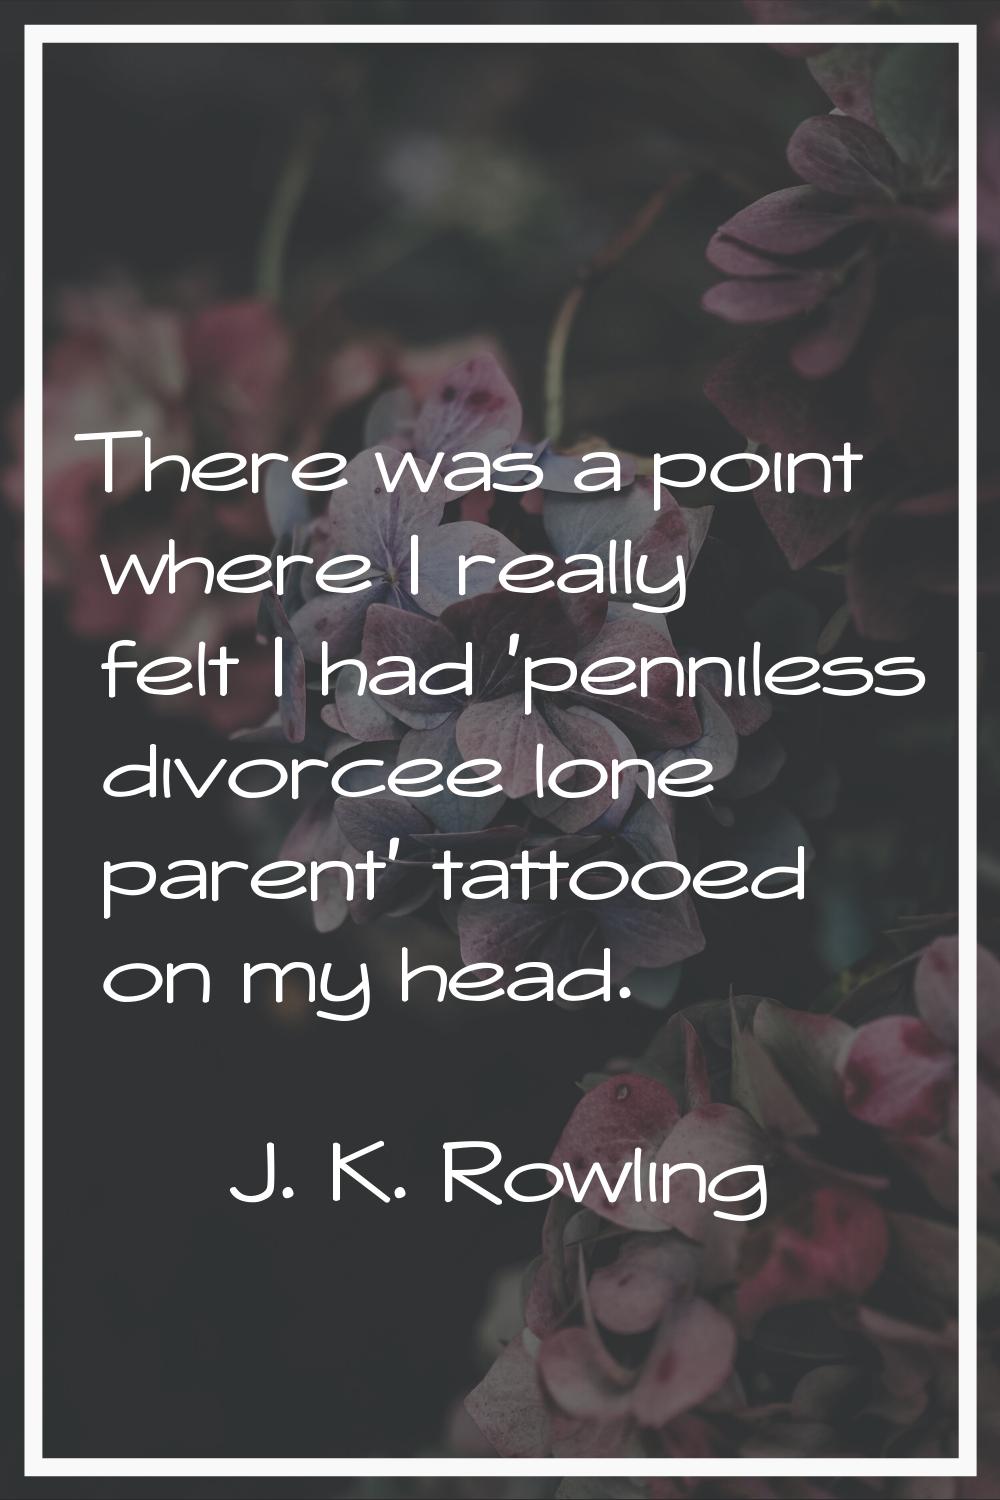 There was a point where I really felt I had 'penniless divorcee lone parent' tattooed on my head.